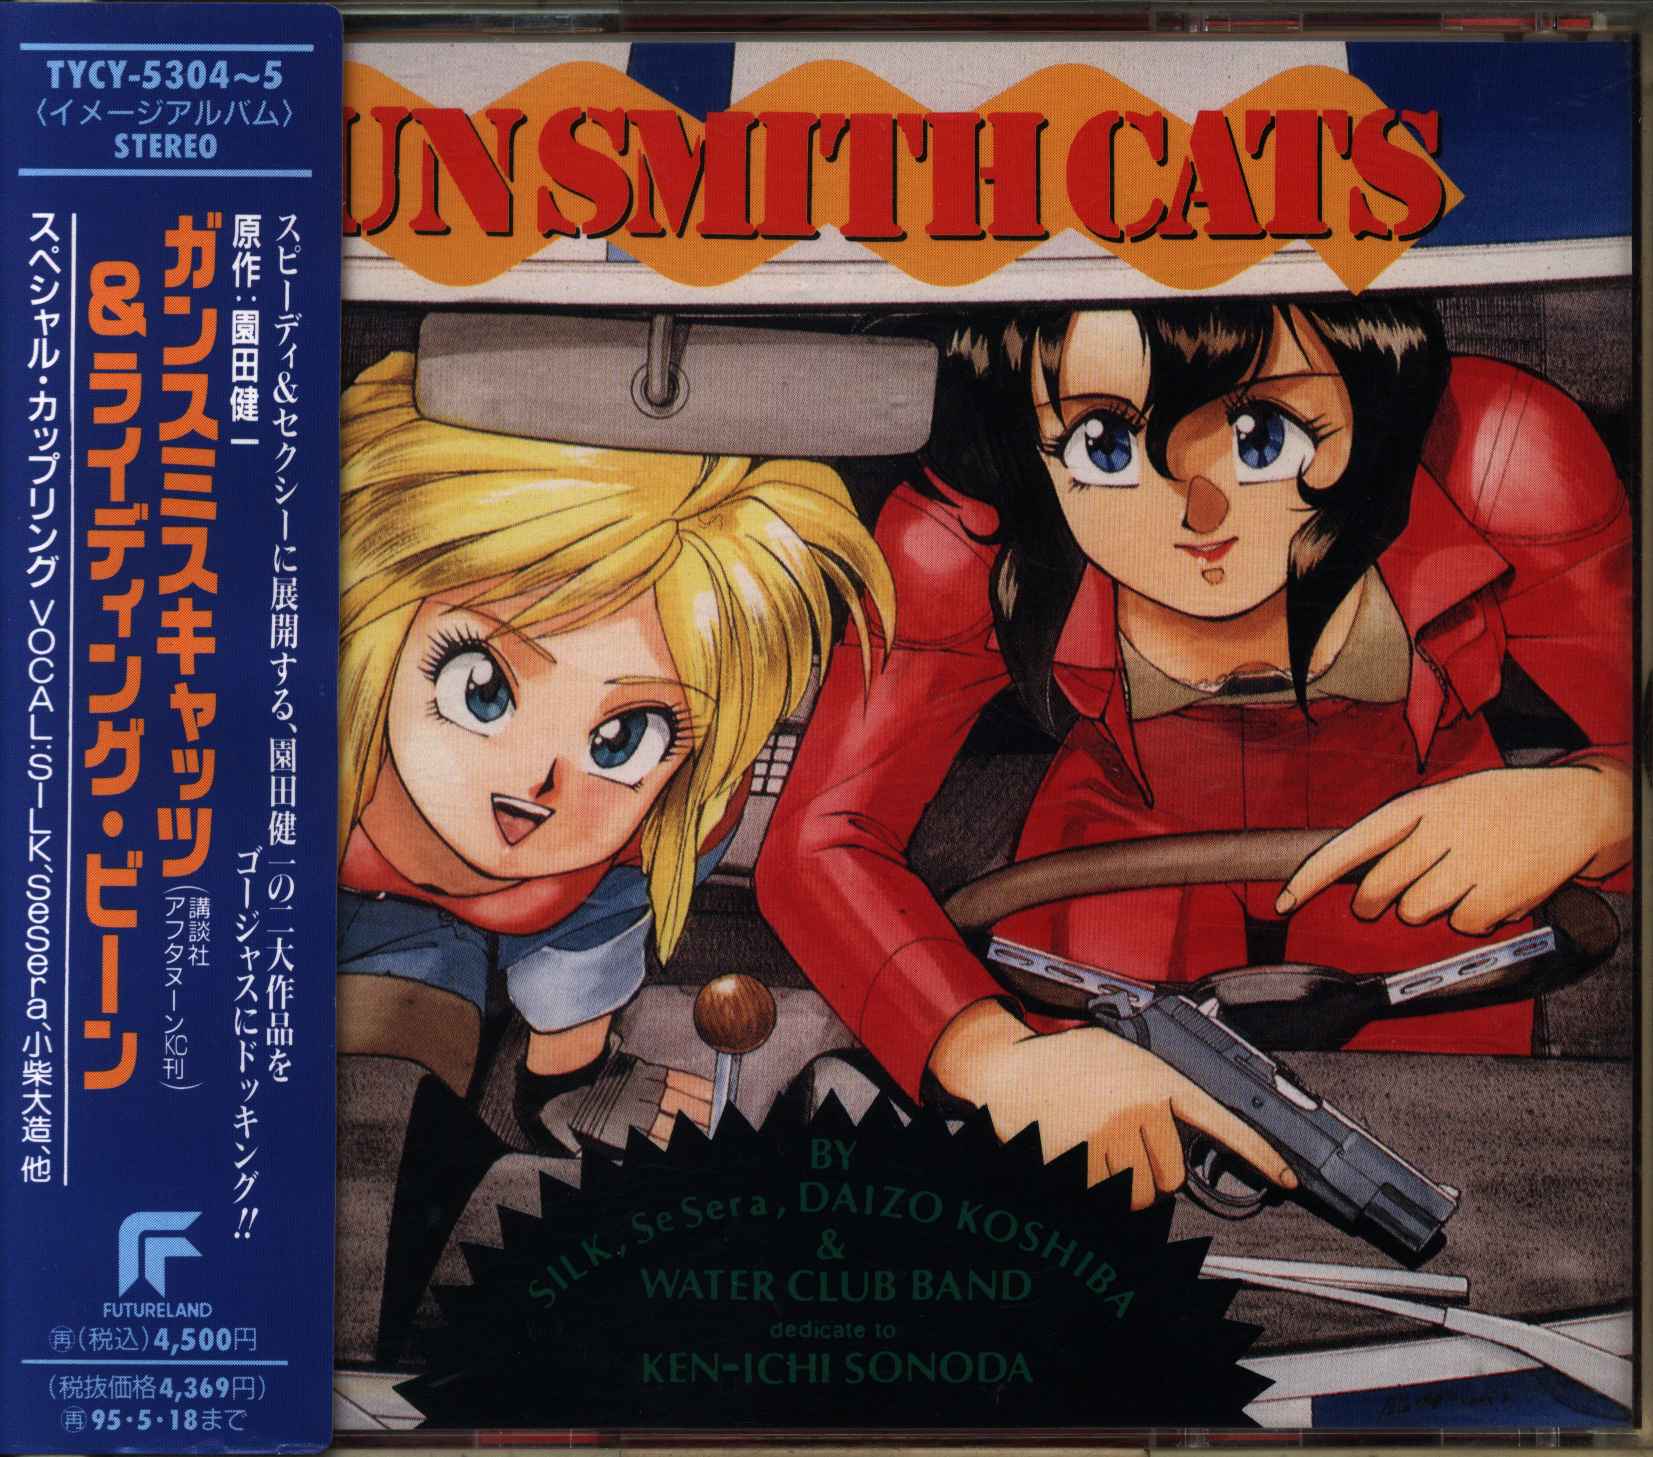 Anime Poster Gunsmith Cats Poster Decorative Painting Canvas Wall Art  Living Room Poster Bedroom Painting 20x30cm : Amazon.de: Home & Kitchen